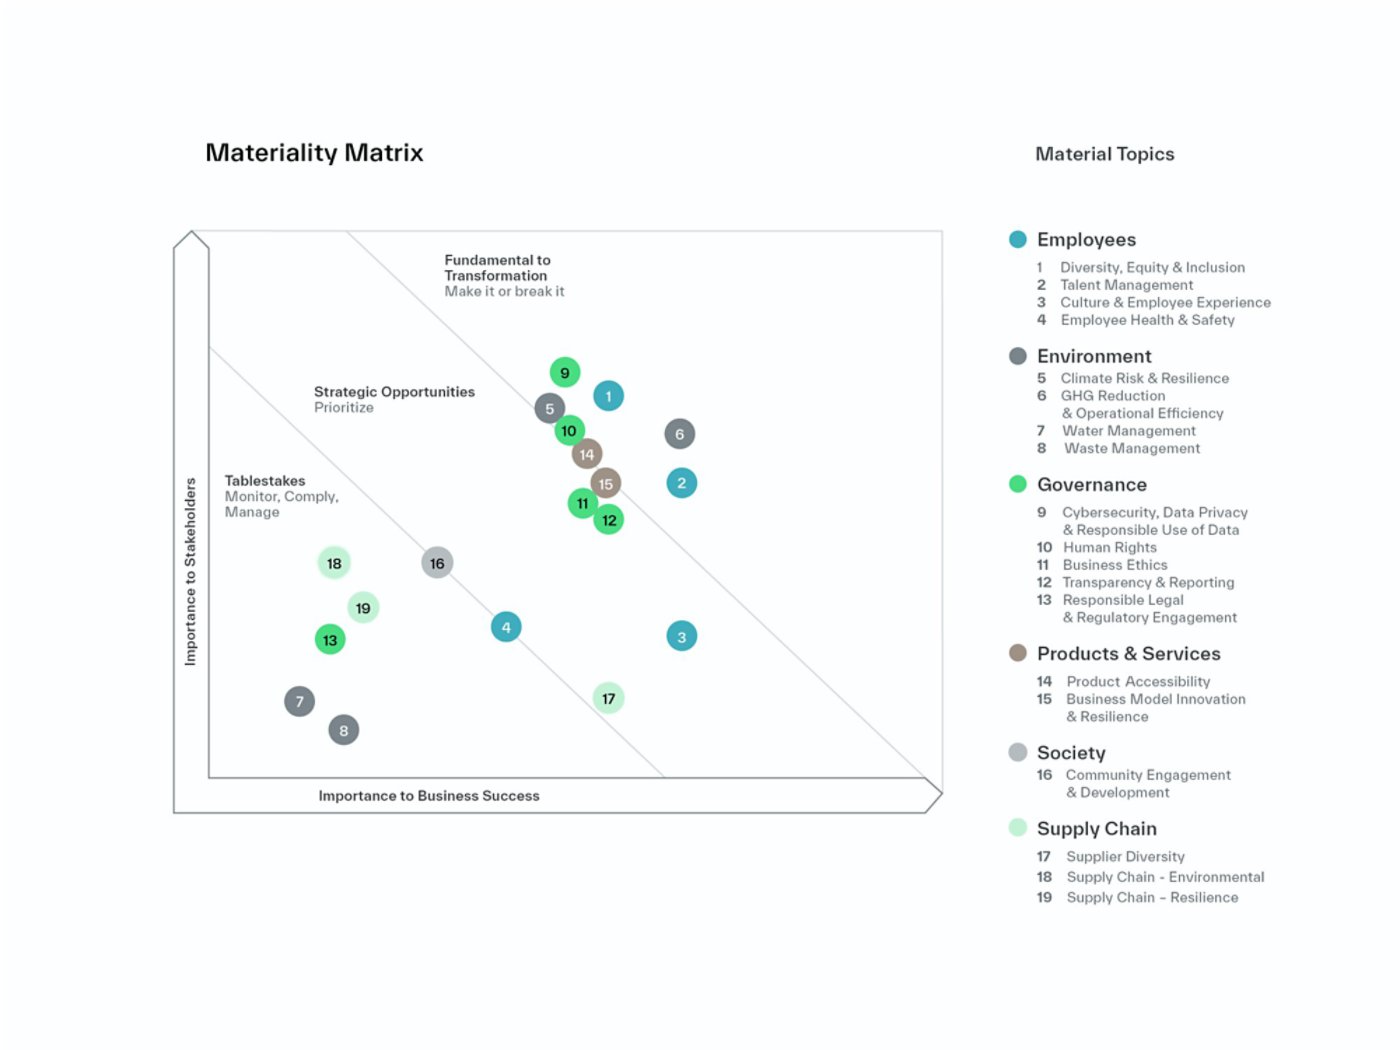 Our first materiality assessment here, which maps the environmental, social and governance issues most relevant to our company, as it relates to both potential risk to our business and impact on society. 